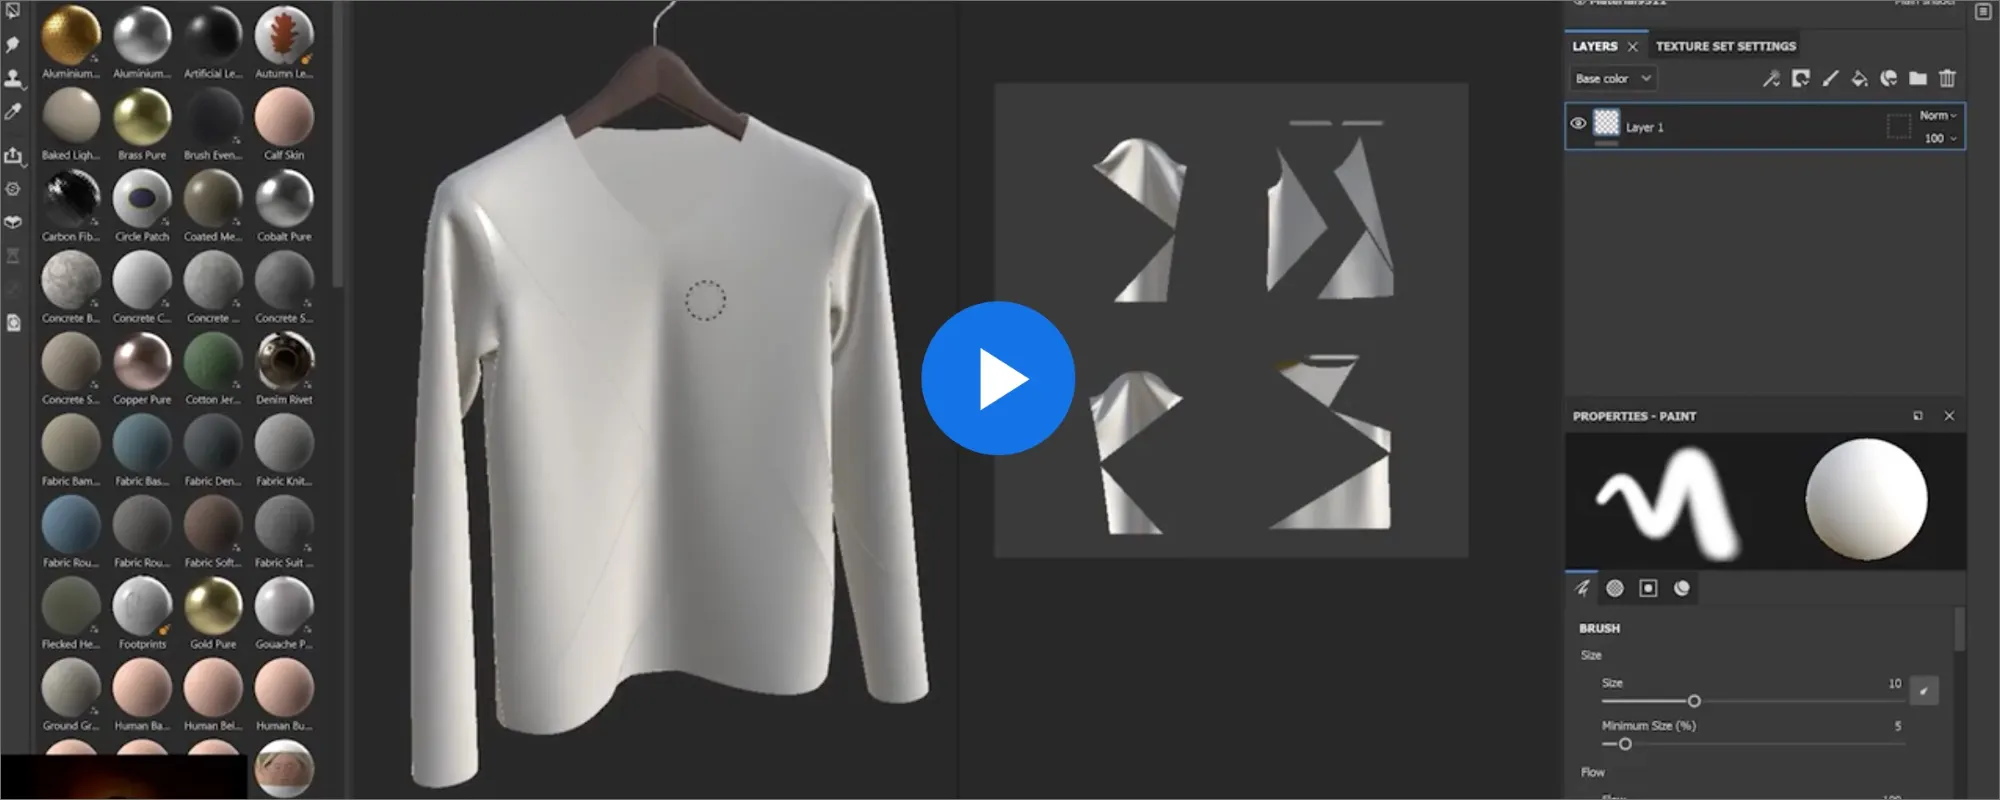 Image of clothing from Skeeva in his Adobe MAX session. 